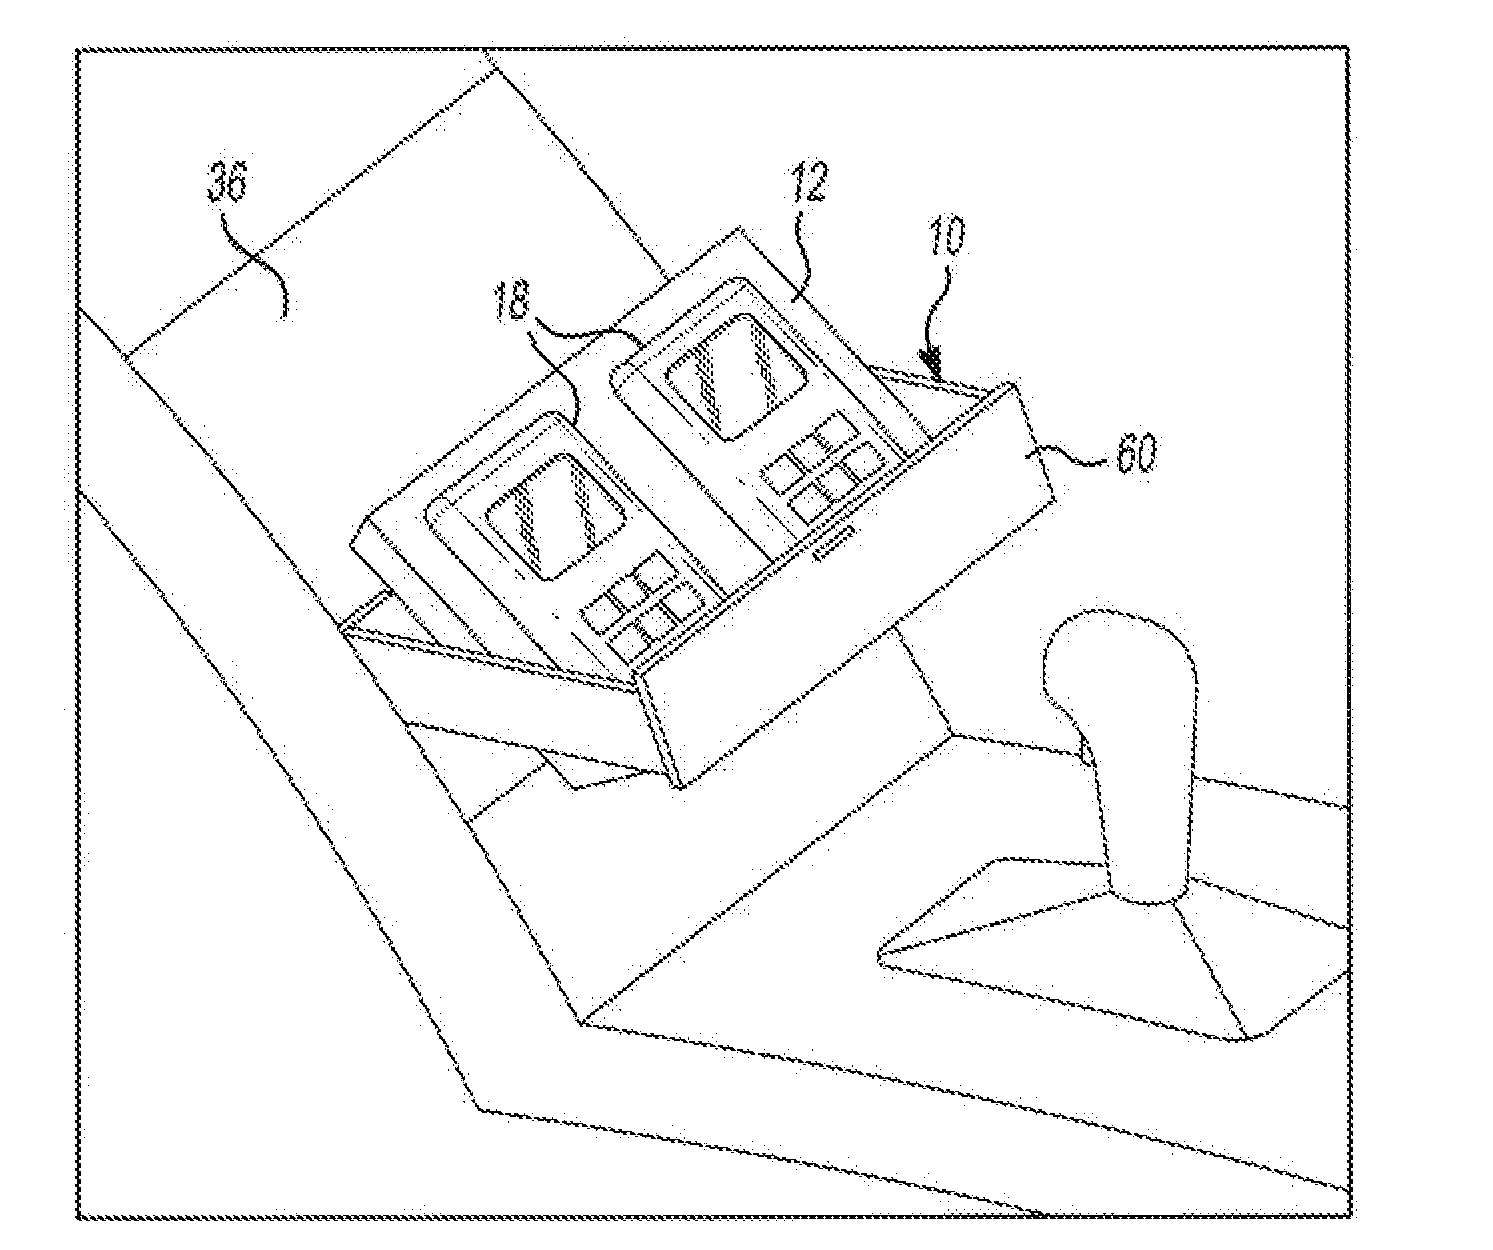 Recharging or connection tray for portable electronic devices